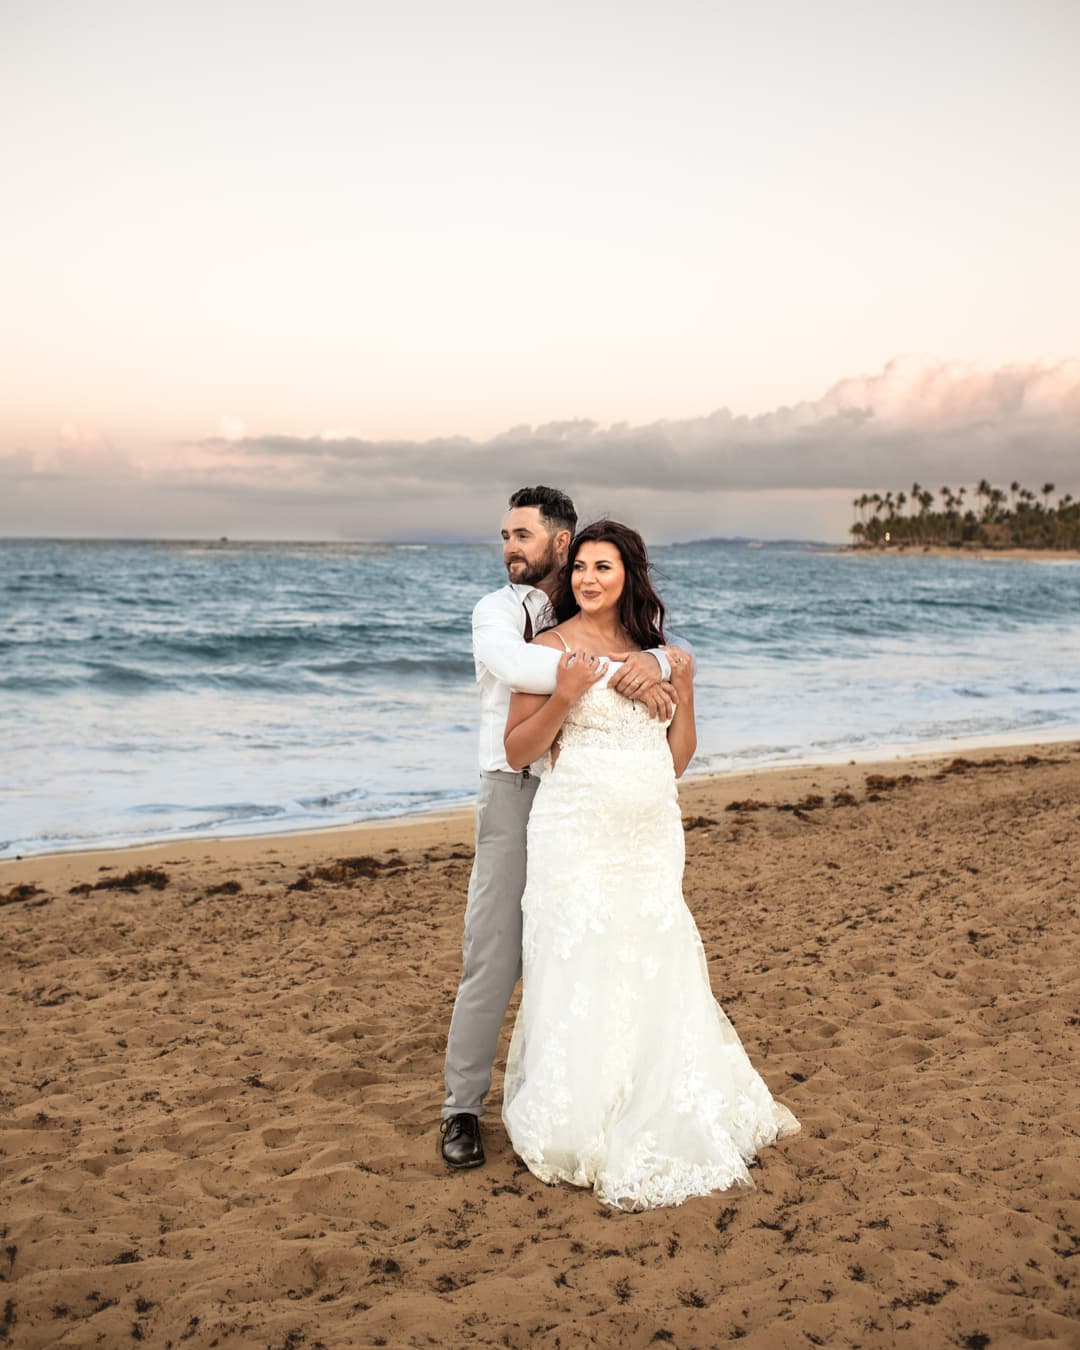 The Magic of Sunset Wedding Photography: A Glimpse into the Duffus Family's Destination Wedding